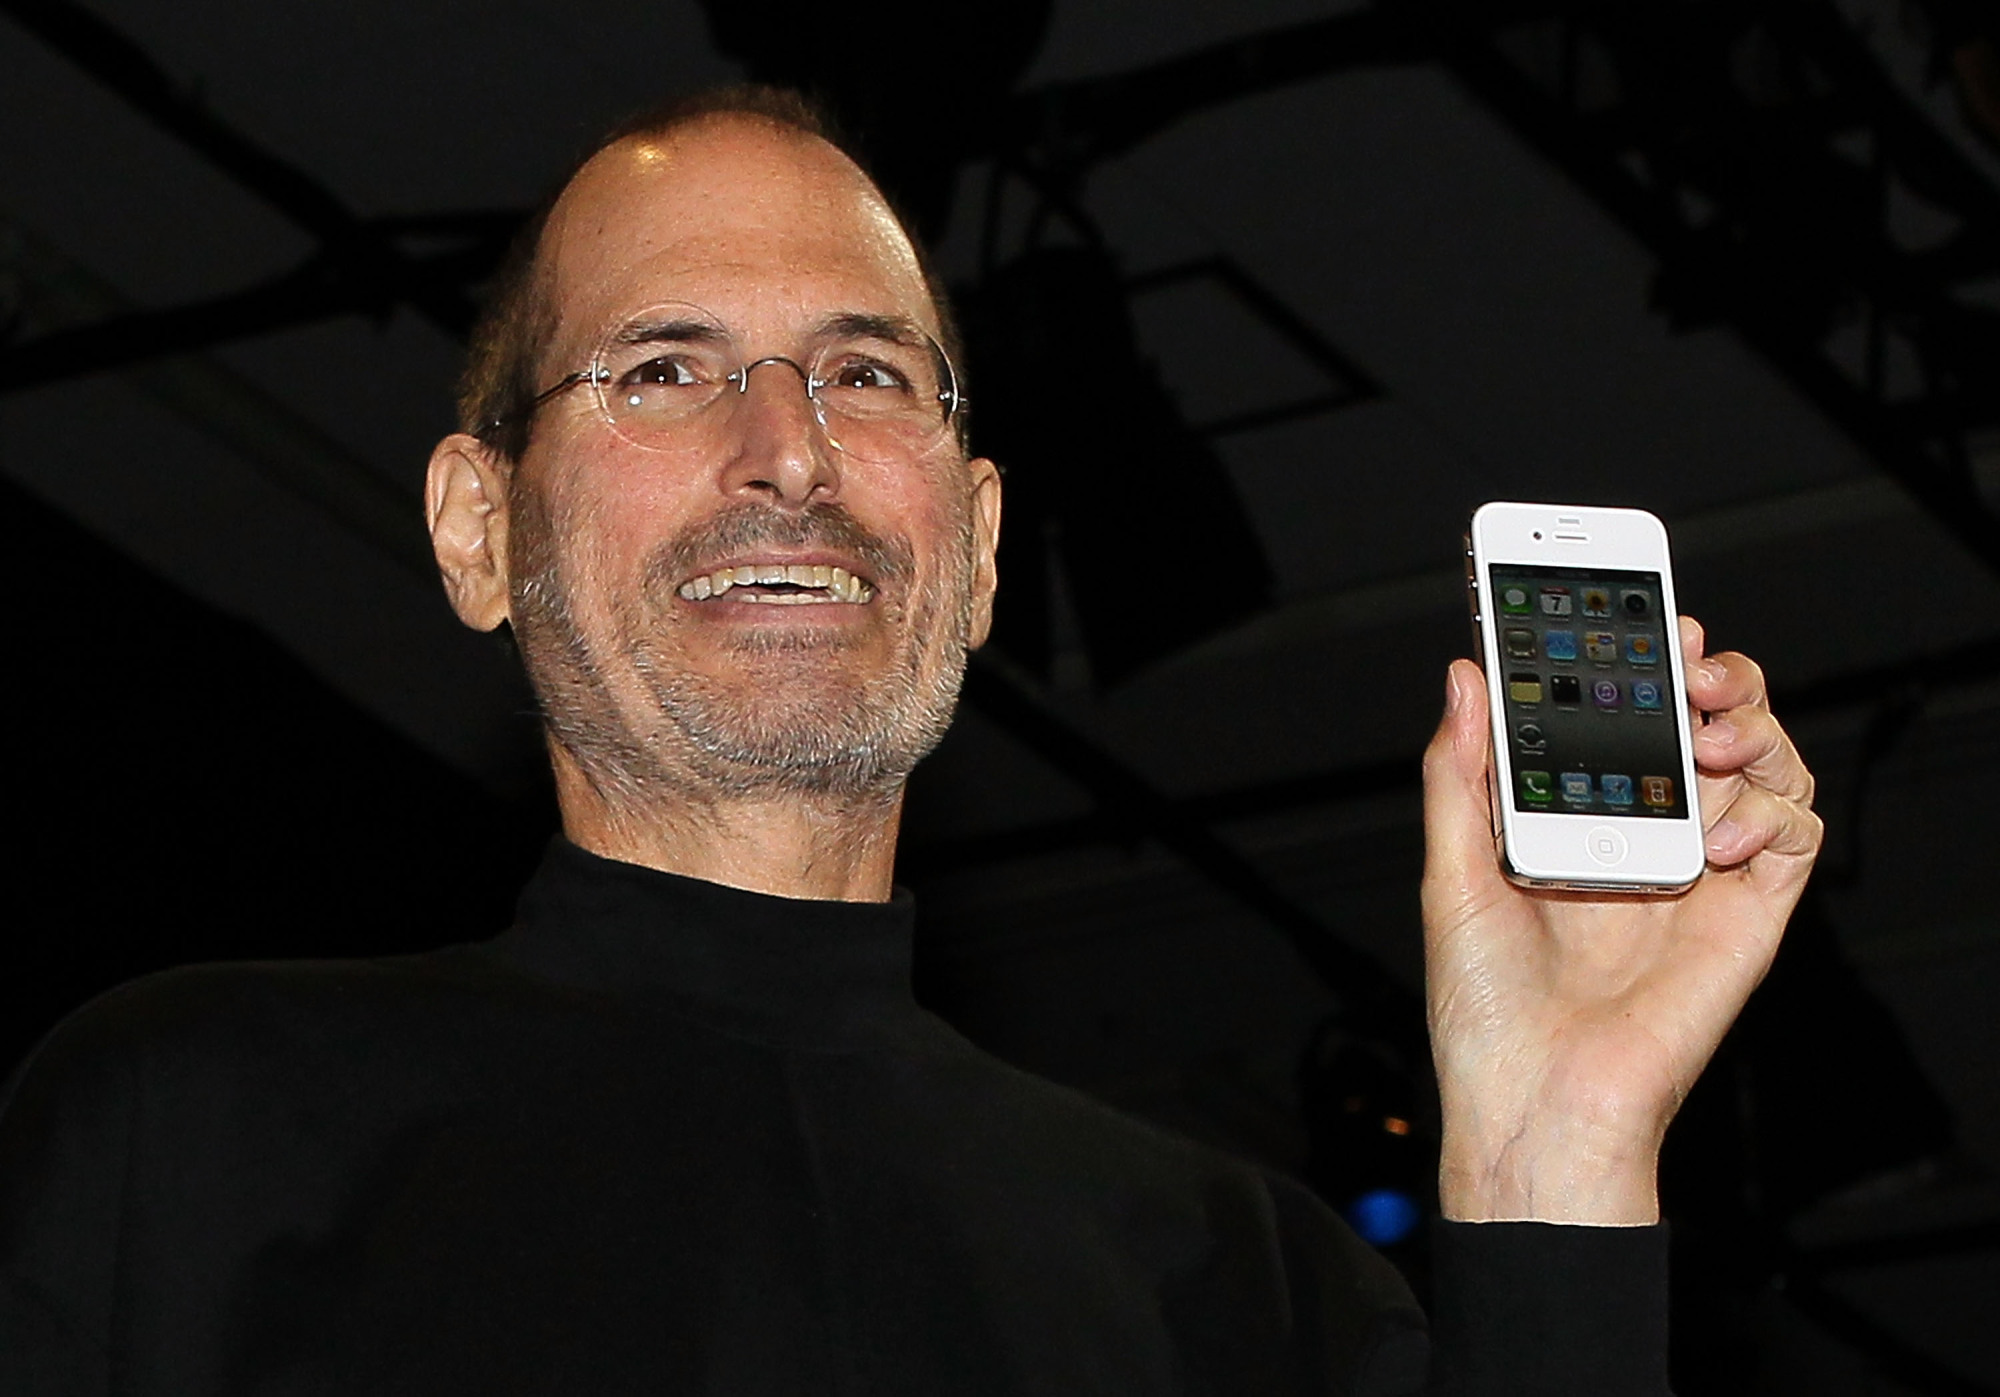 Image of Steve Jobs holding up the iPhone 4